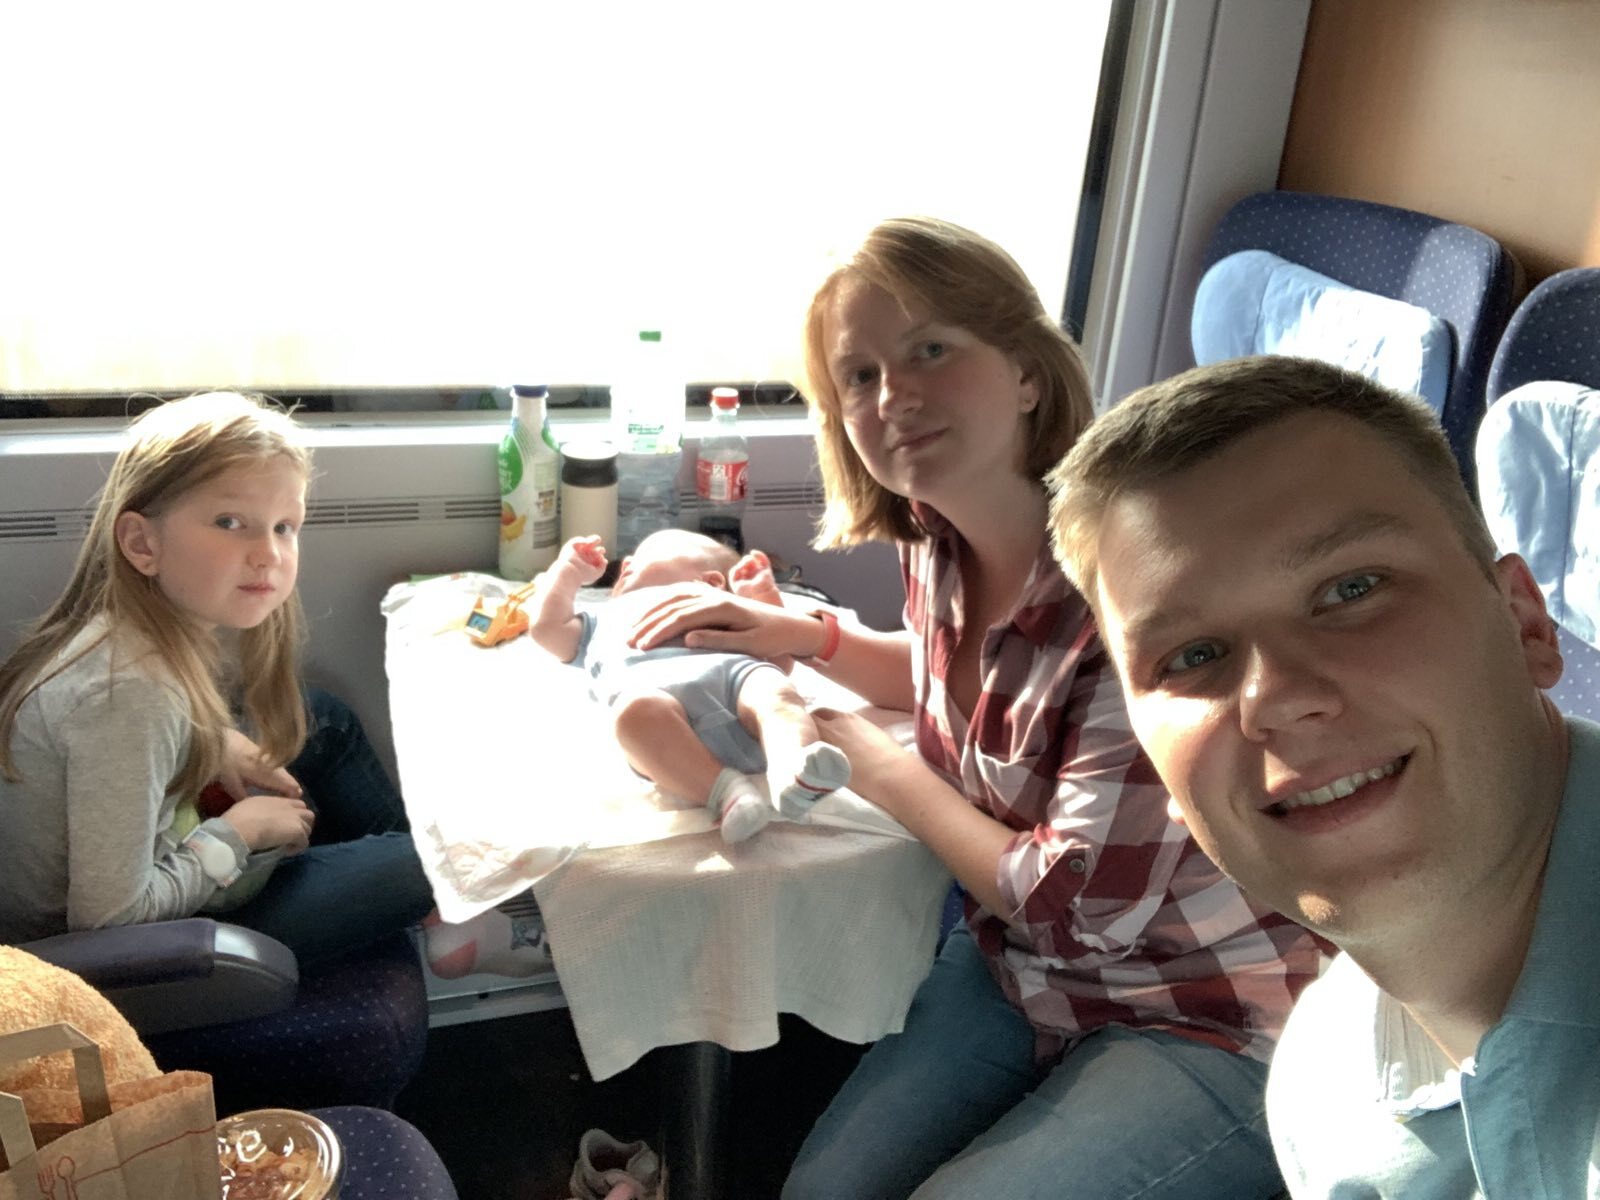 Our designer Alex on the train with his family